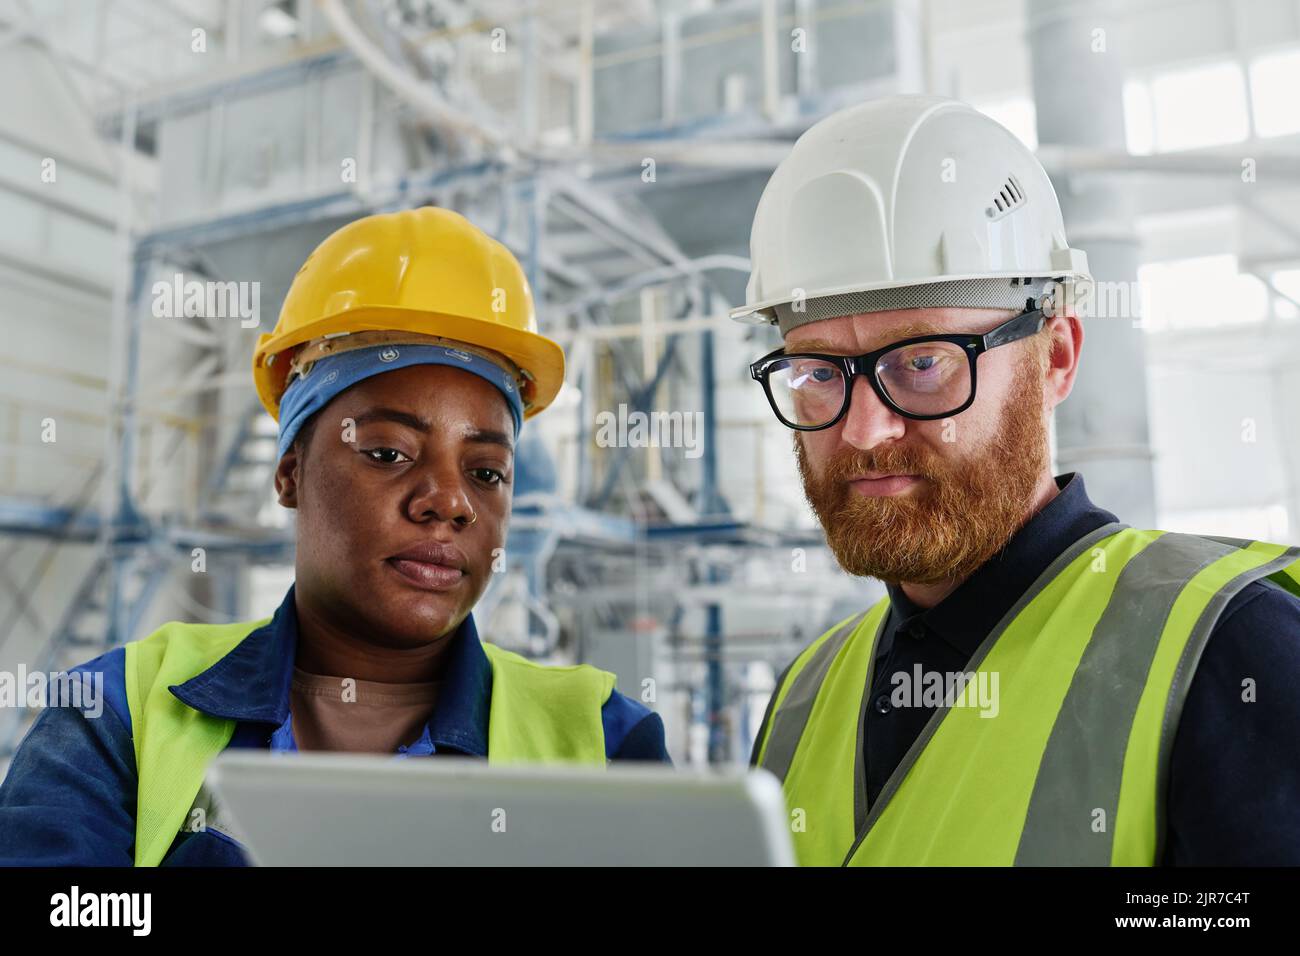 Two workers of modern factory looking through online information at tablet screen while consulting manual guide in workshop Stock Photo